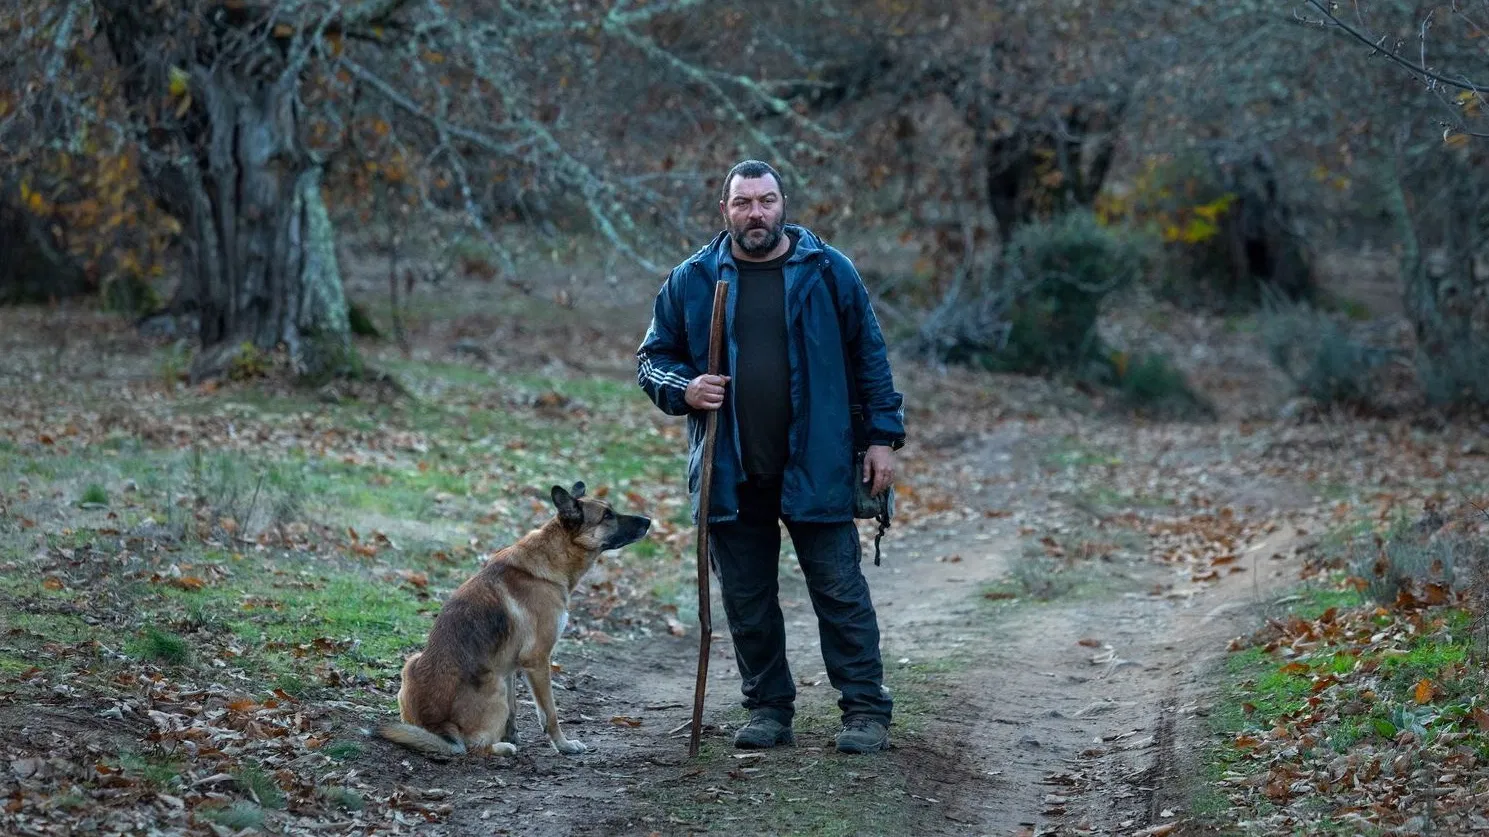 Beasts of different species: Ménochet and dog haunt the forests in "As Bestas" / Photo courtesy of Latido Films, Greenwich Entertainment & Curzon